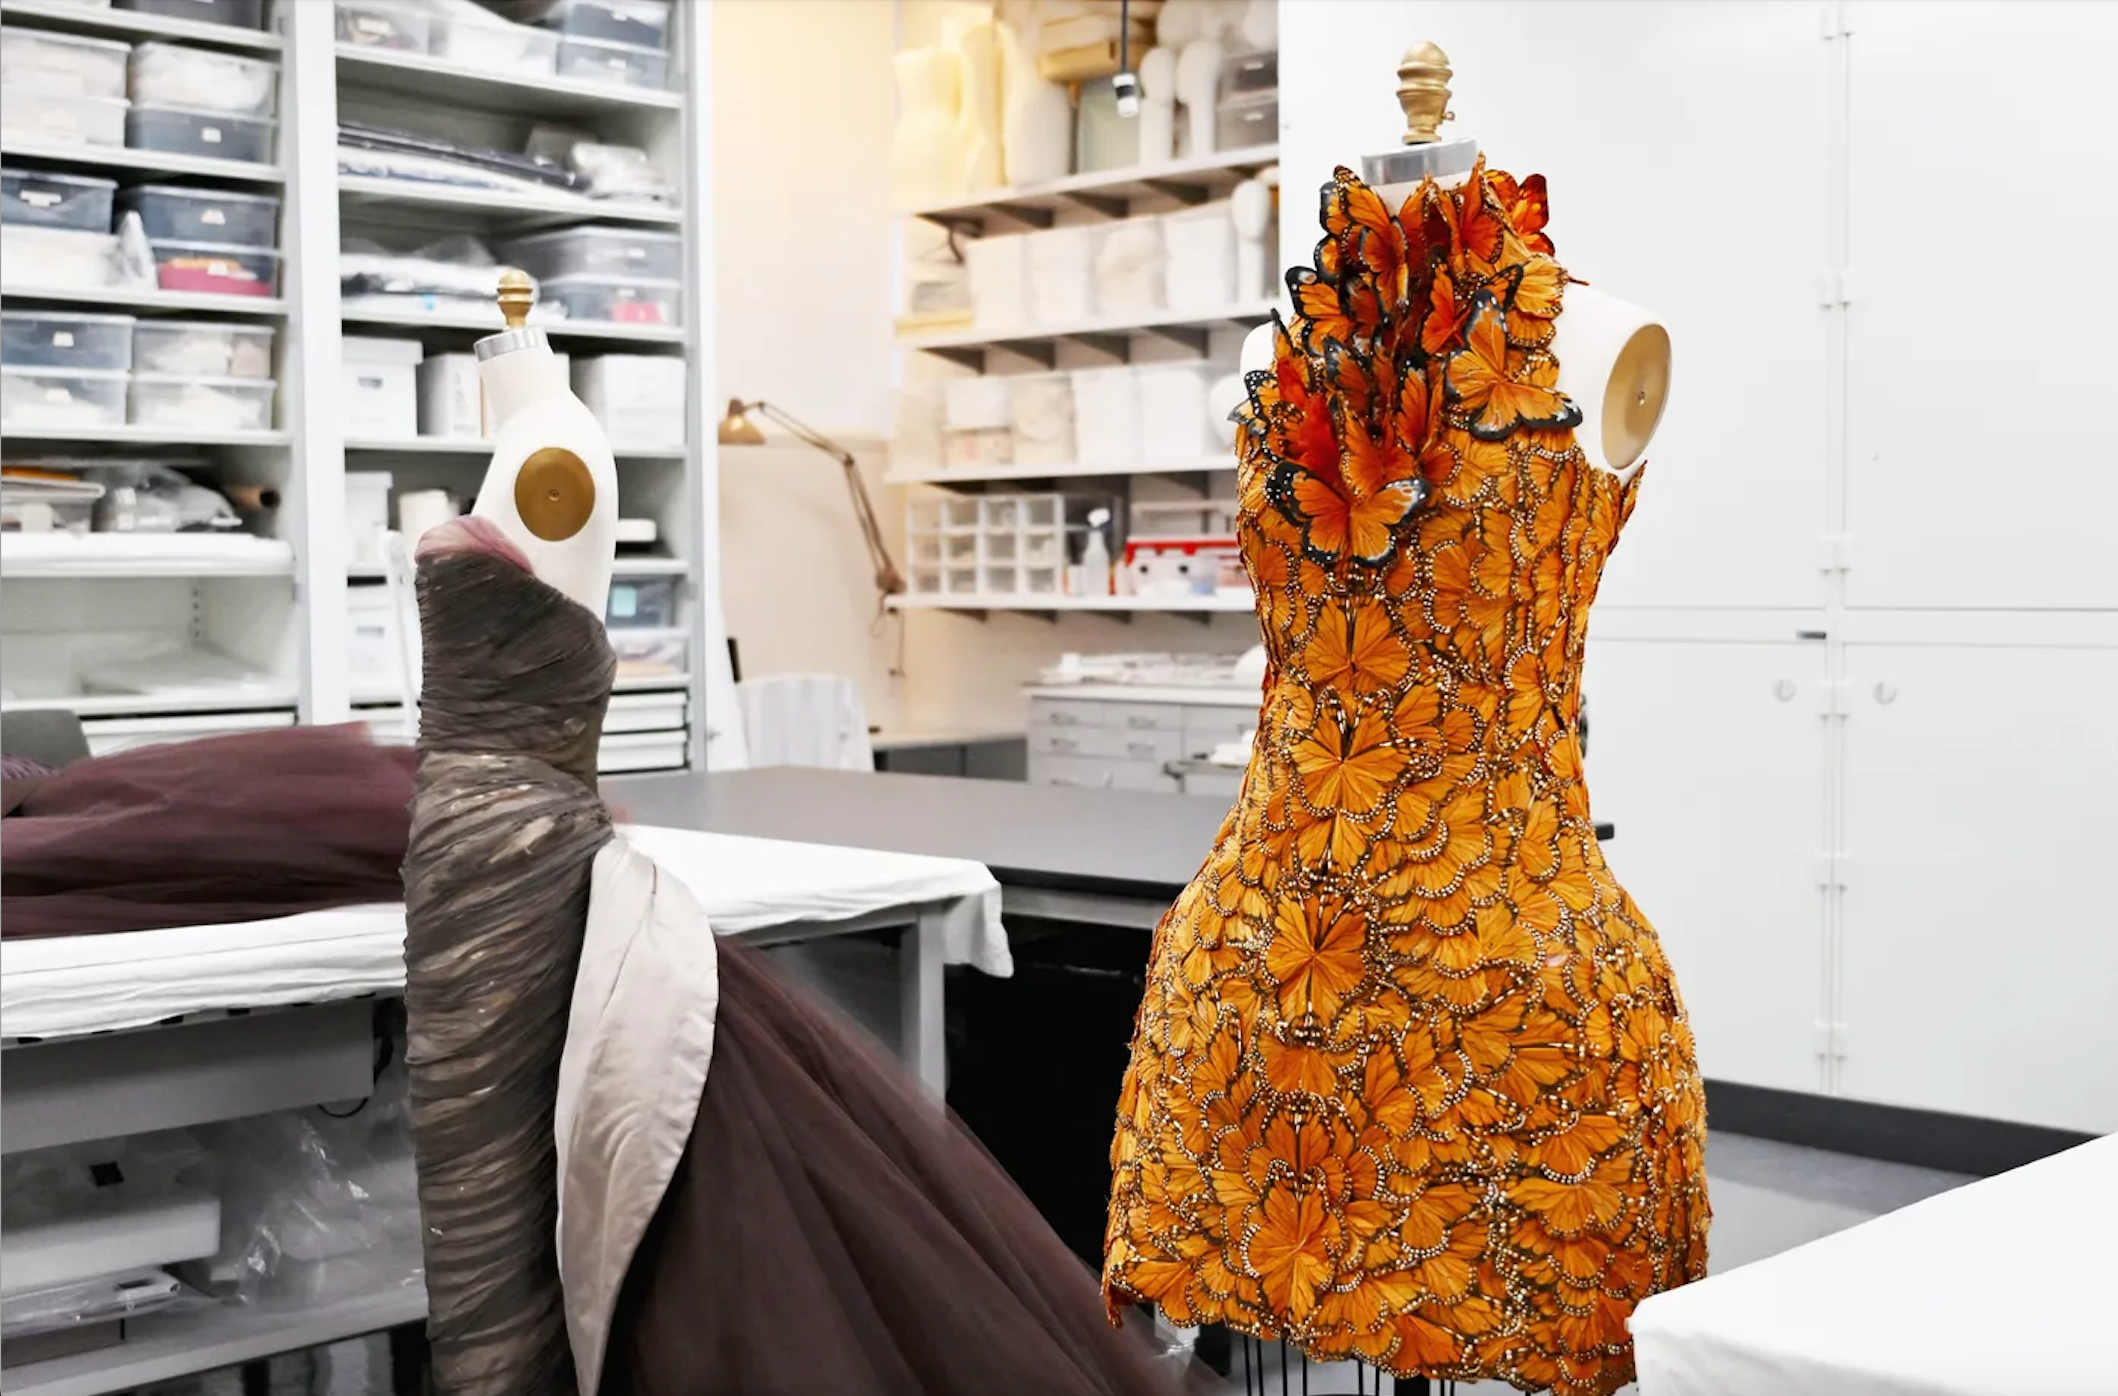 On the heels of its Karl Lagerfeld-inspired 2023 showcase, the Metropolitan Museum of Art’s Costume Institute yesterday revealed the theme behind its upcoming 2024 exhibition. Photo: Fashionista.com